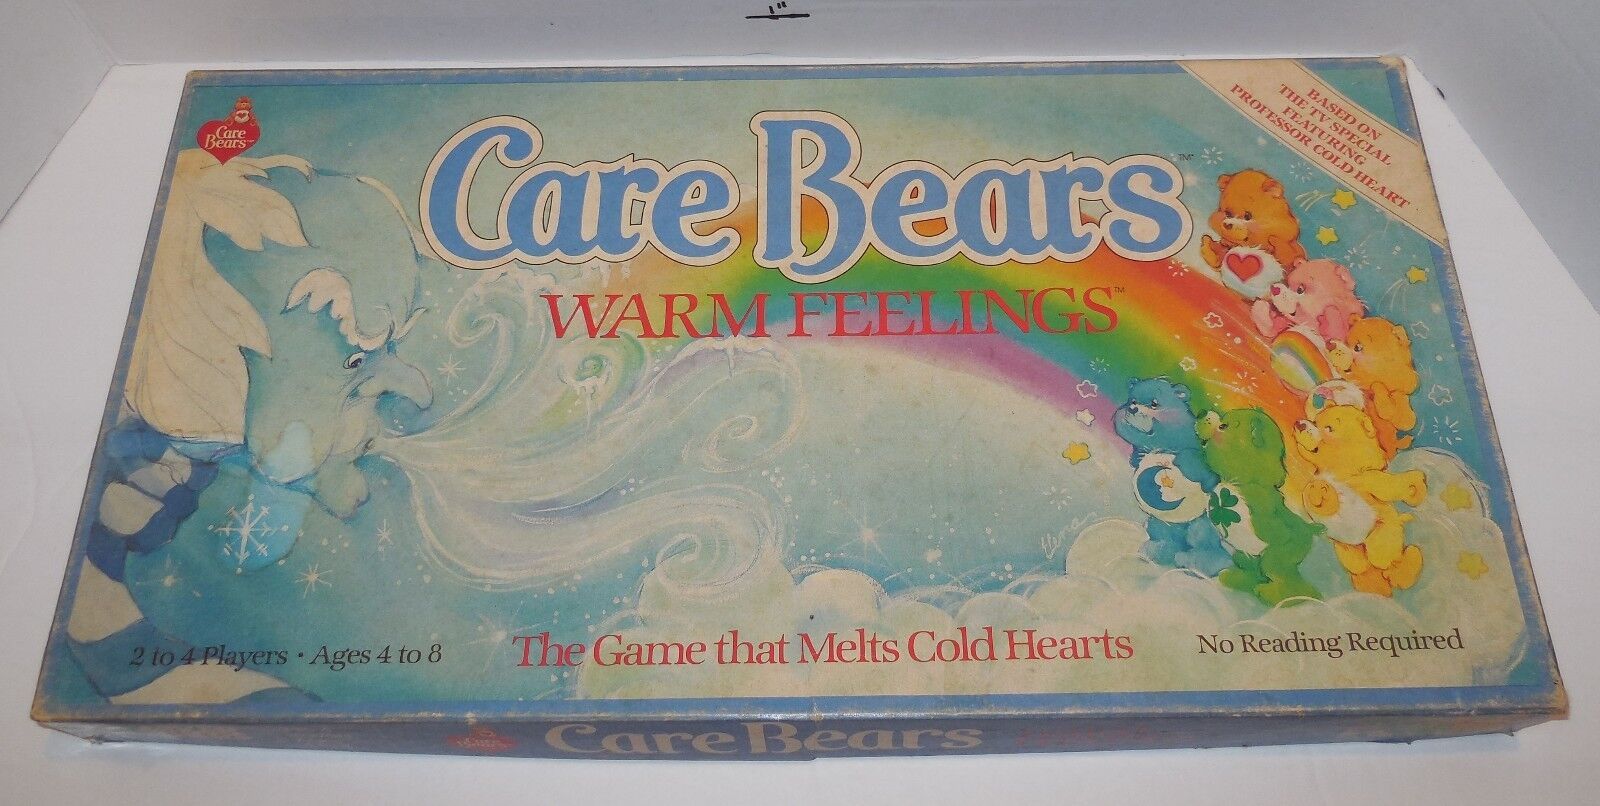 Vintage 1984 Care Bears Warm Feelings Board Game Parker Brothers 100% Complete - $47.80